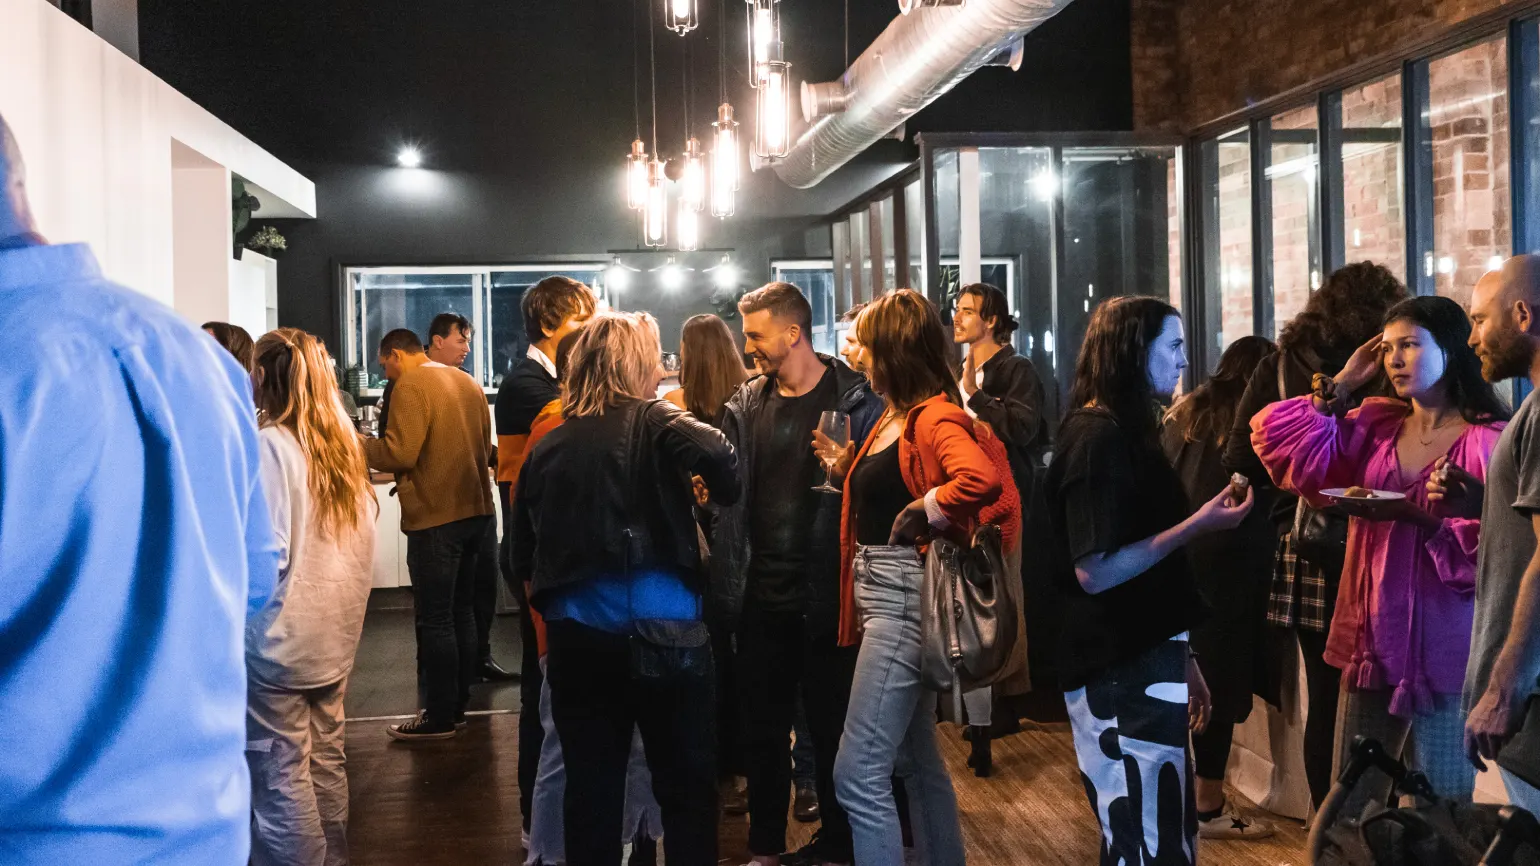 Koworks fostering connection in a coworking community